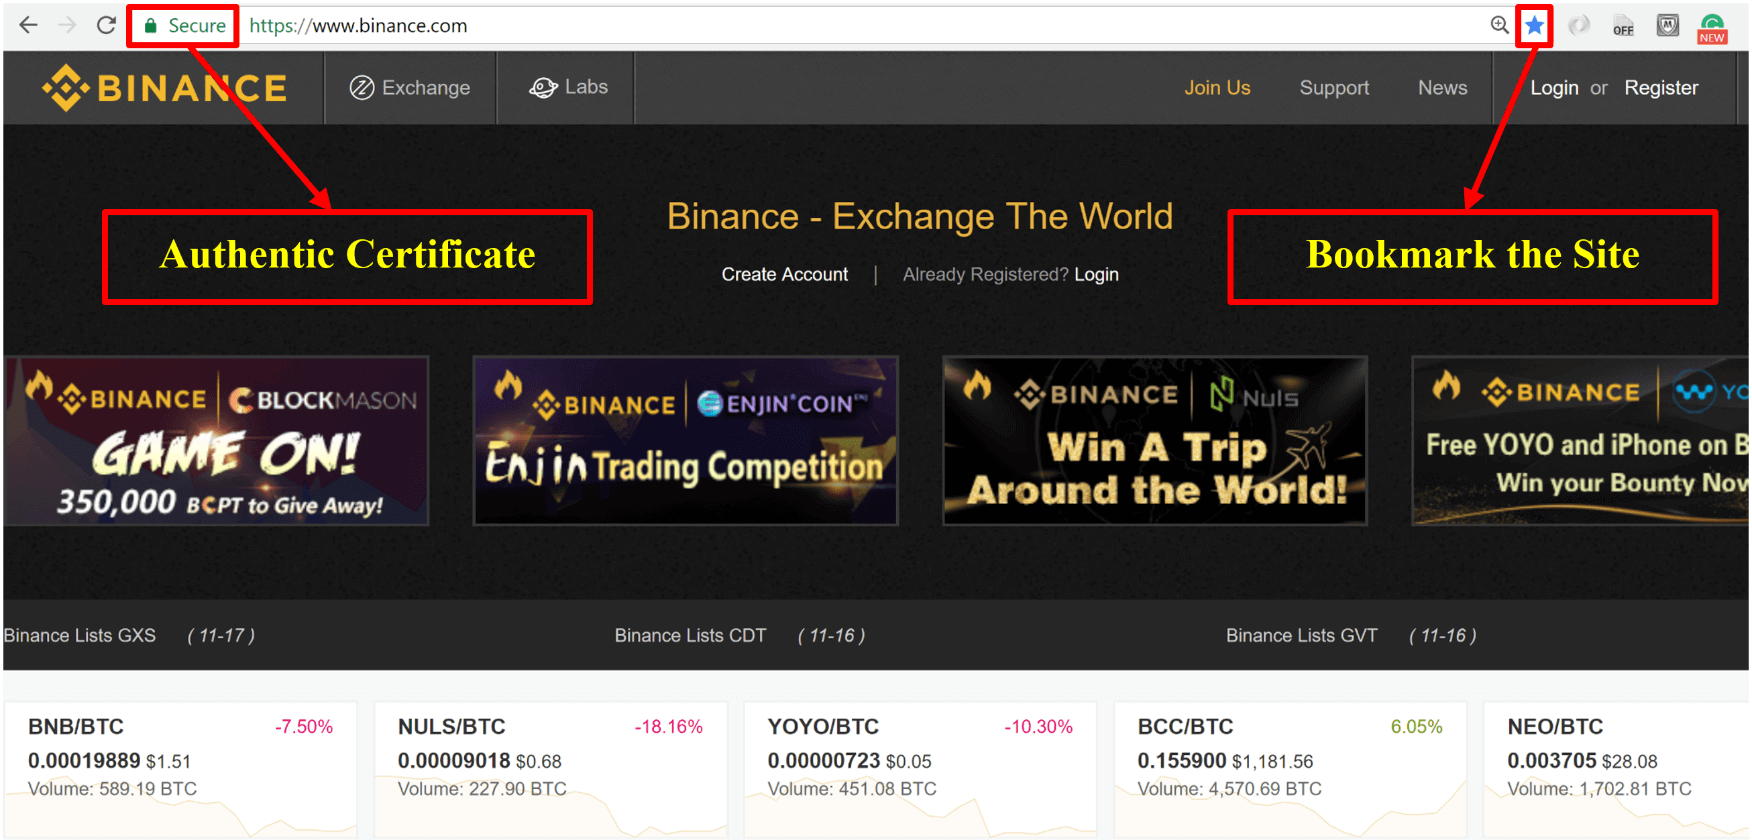 Guide to Binance Exchange: How to Open a Binance Account ...